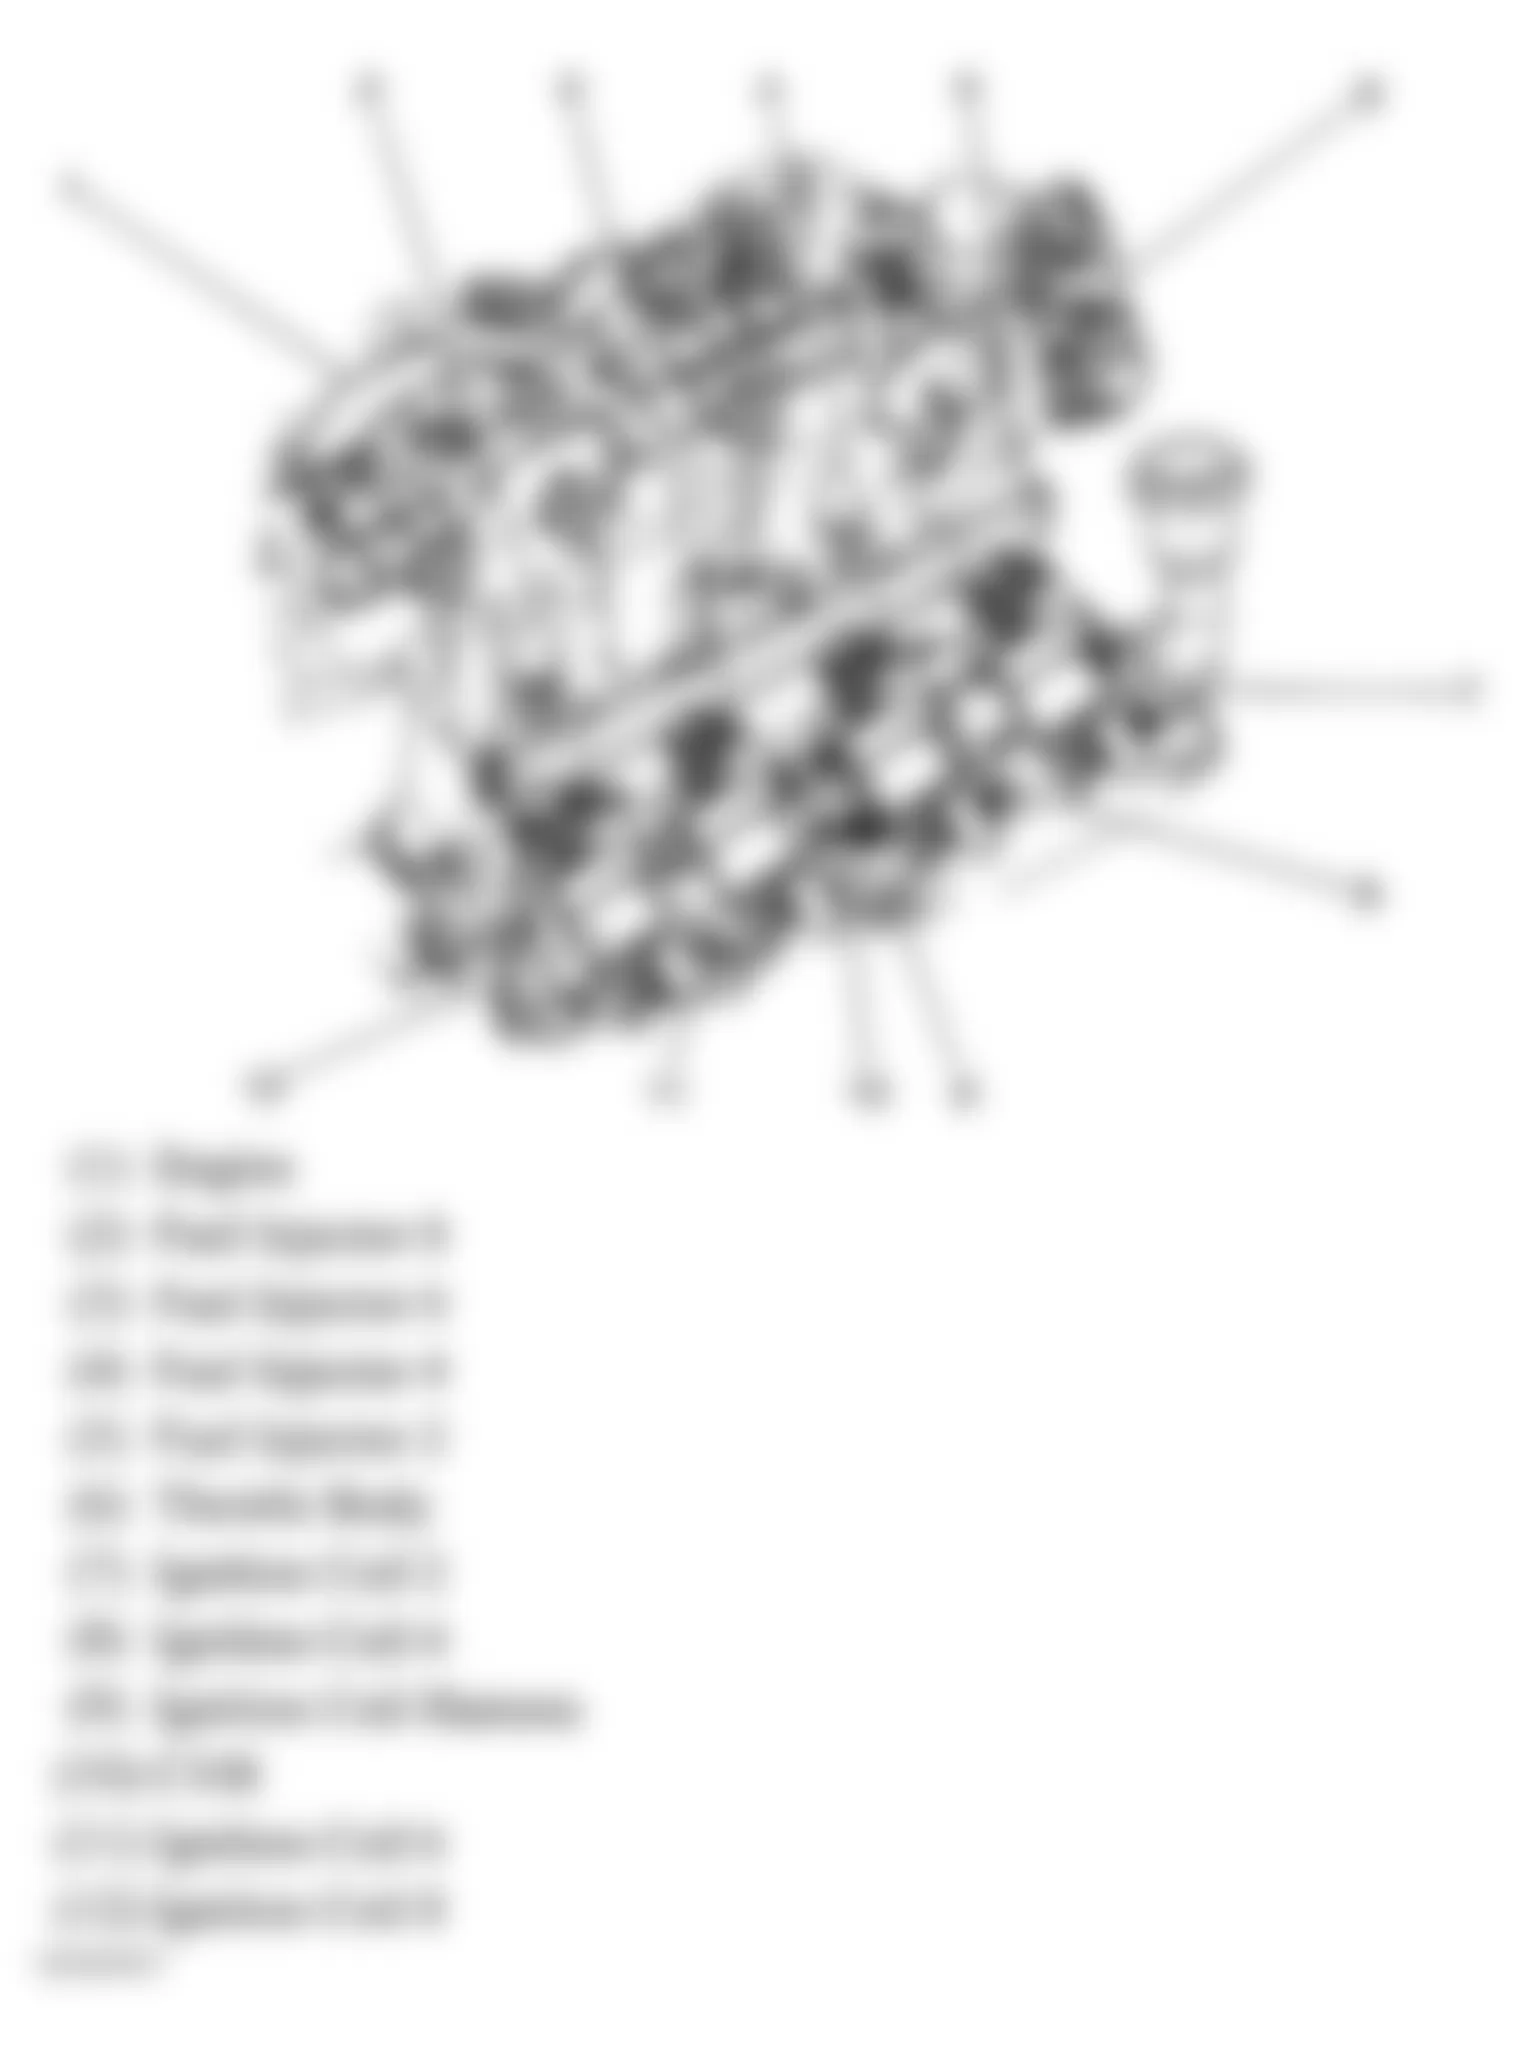 Buick Rainier 2005 - Component Locations -  Upper Right Side Of Engine (5.3L)